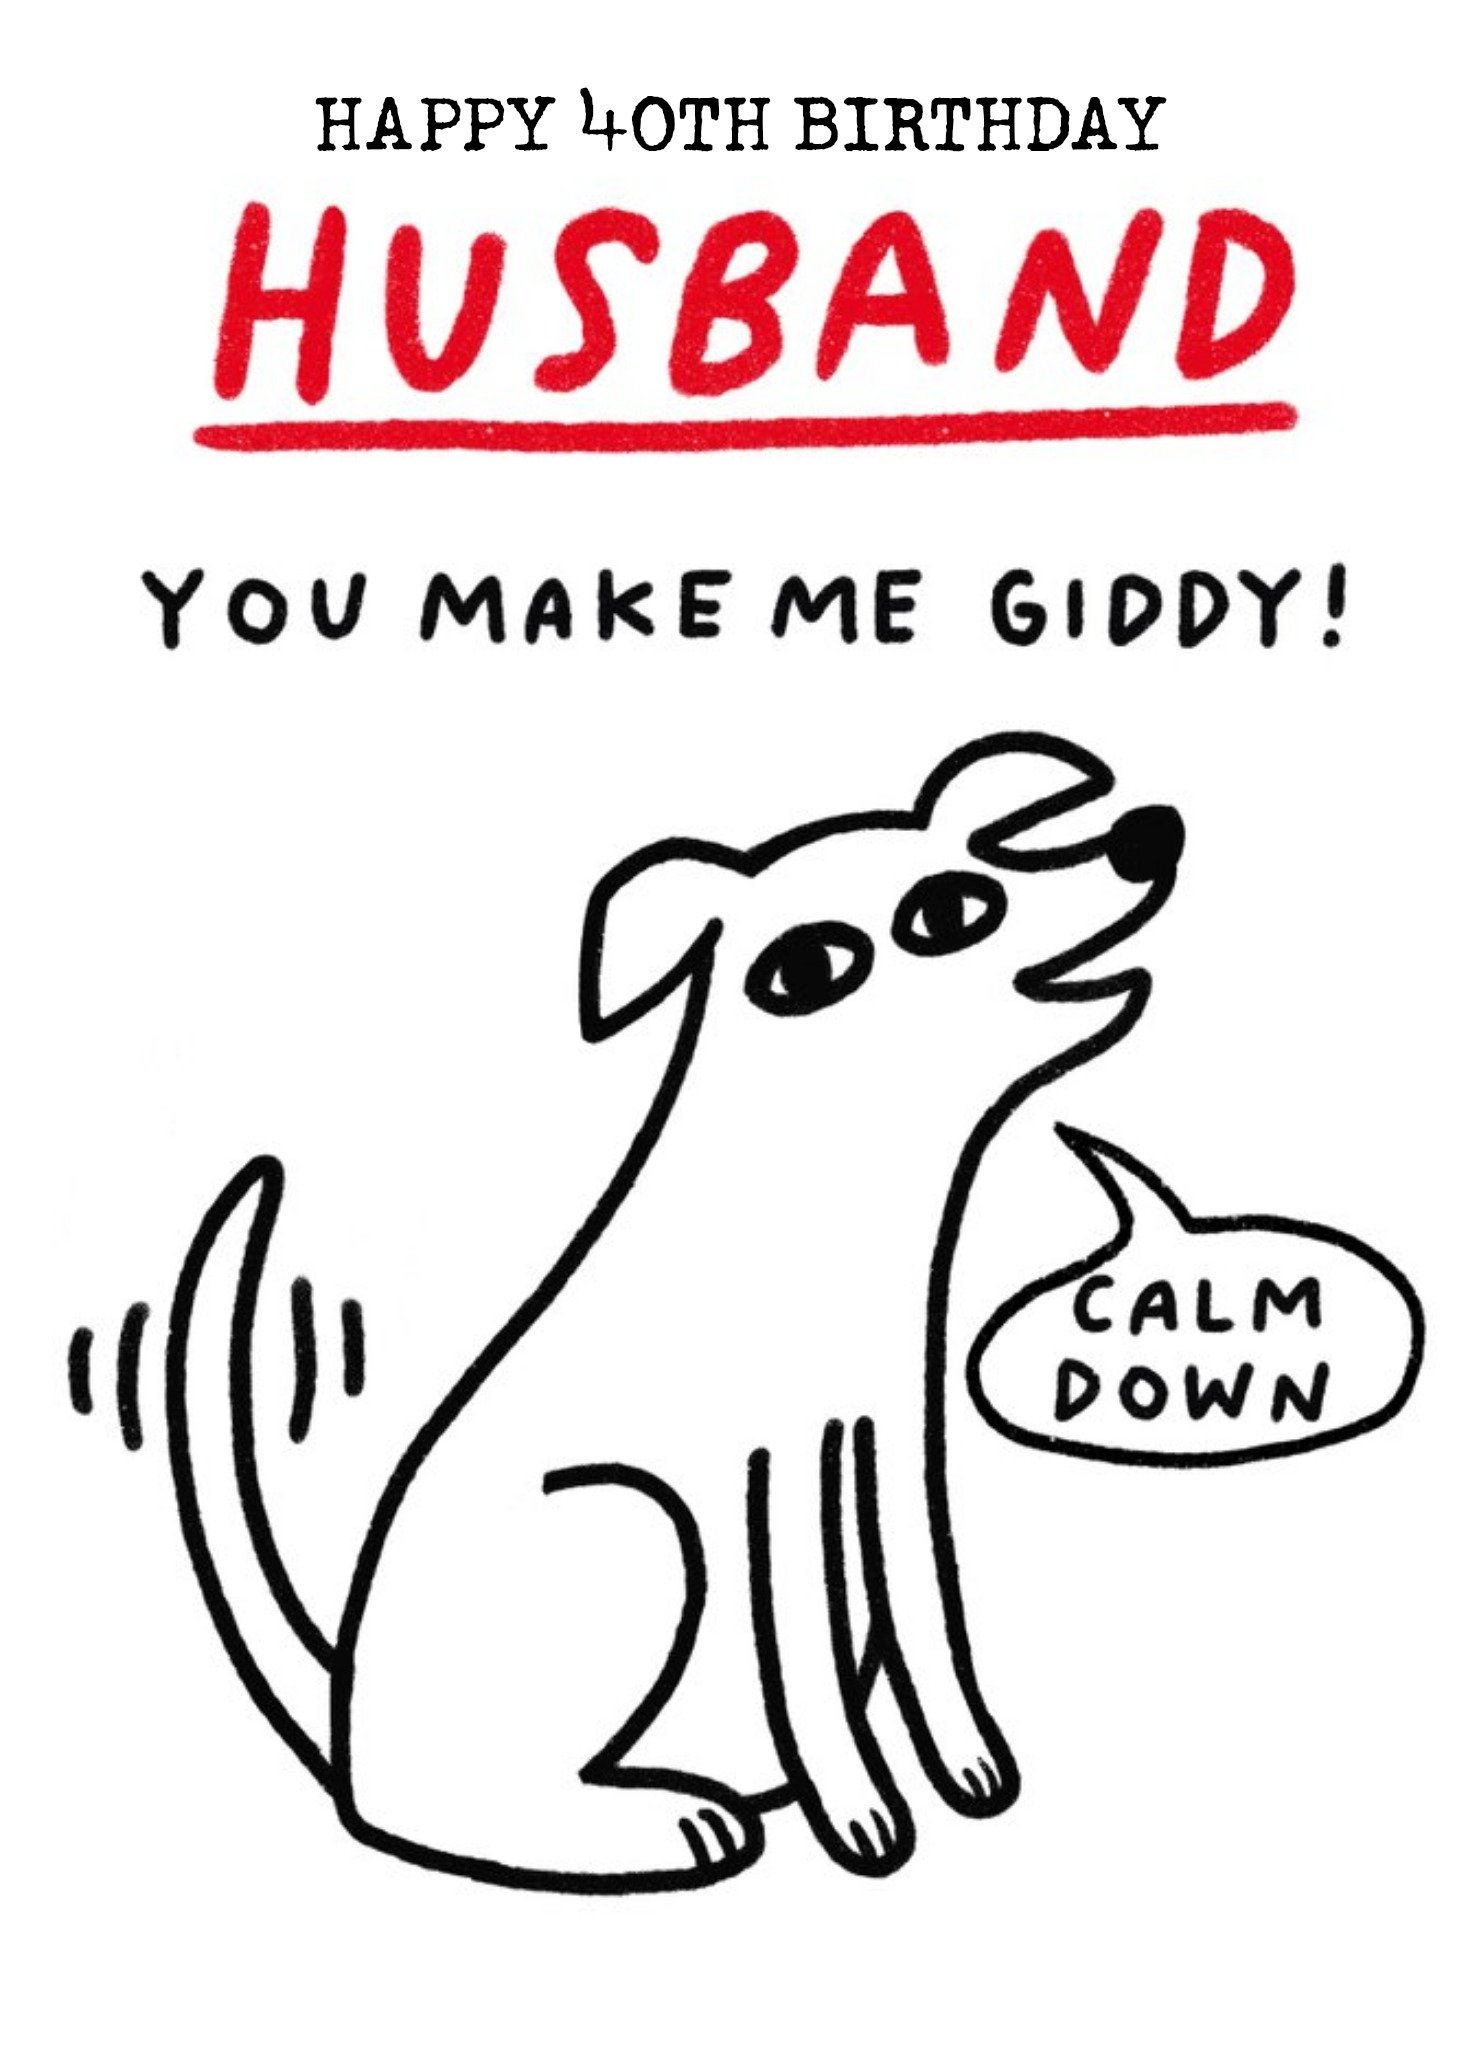 Moonpig Illustration Of An Excited Dog You Make Me Giddy Husband's Birthday Card Ecard